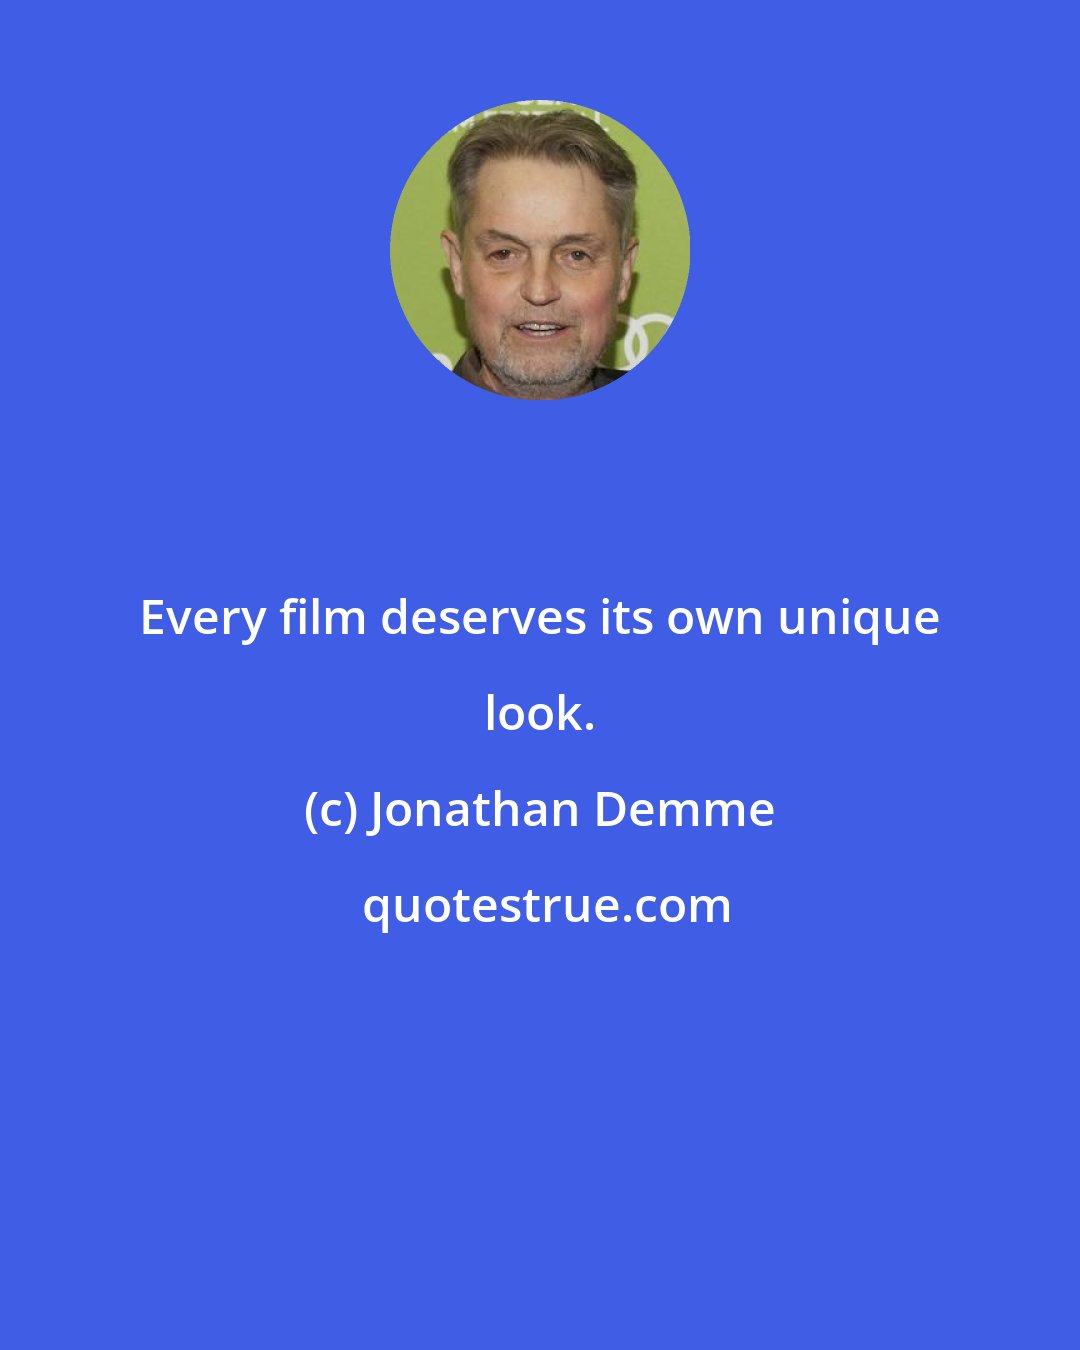 Jonathan Demme: Every film deserves its own unique look.